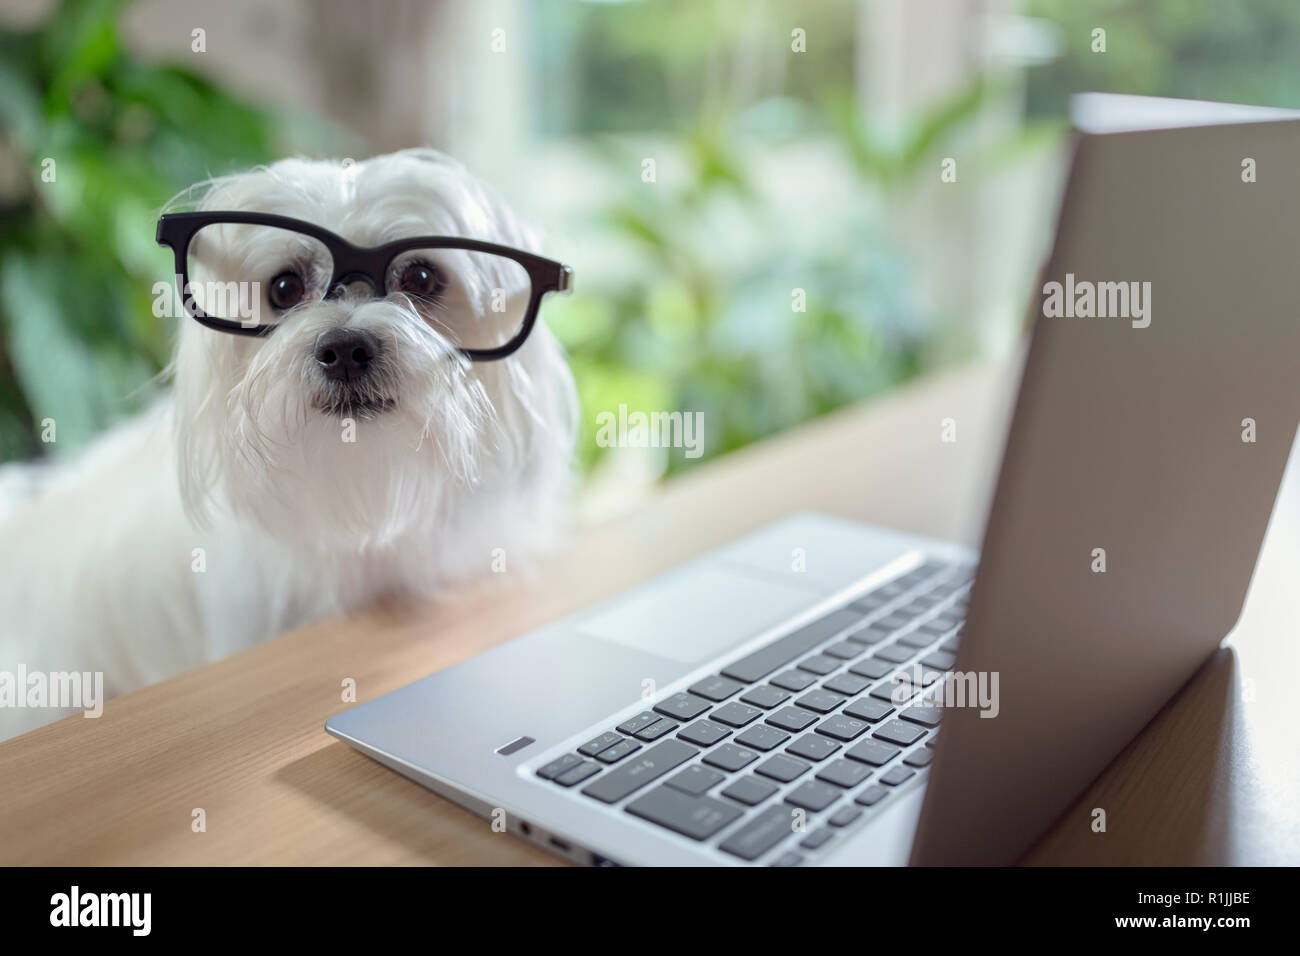 Dog with glasses using laptop computer Stock Photo